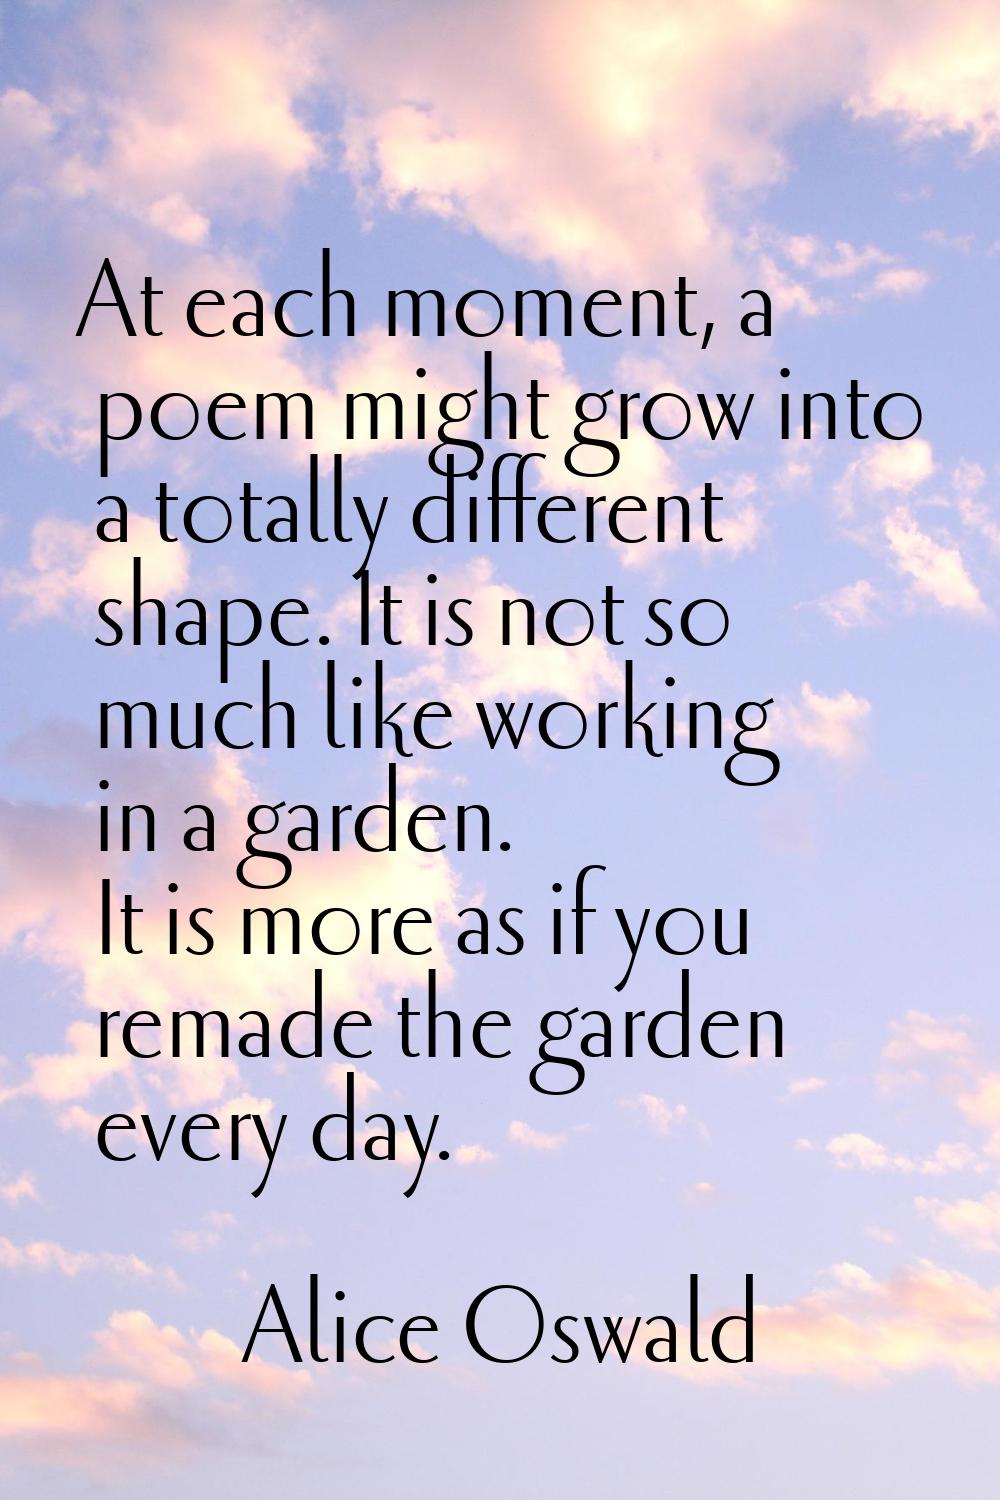 At each moment, a poem might grow into a totally different shape. It is not so much like working in